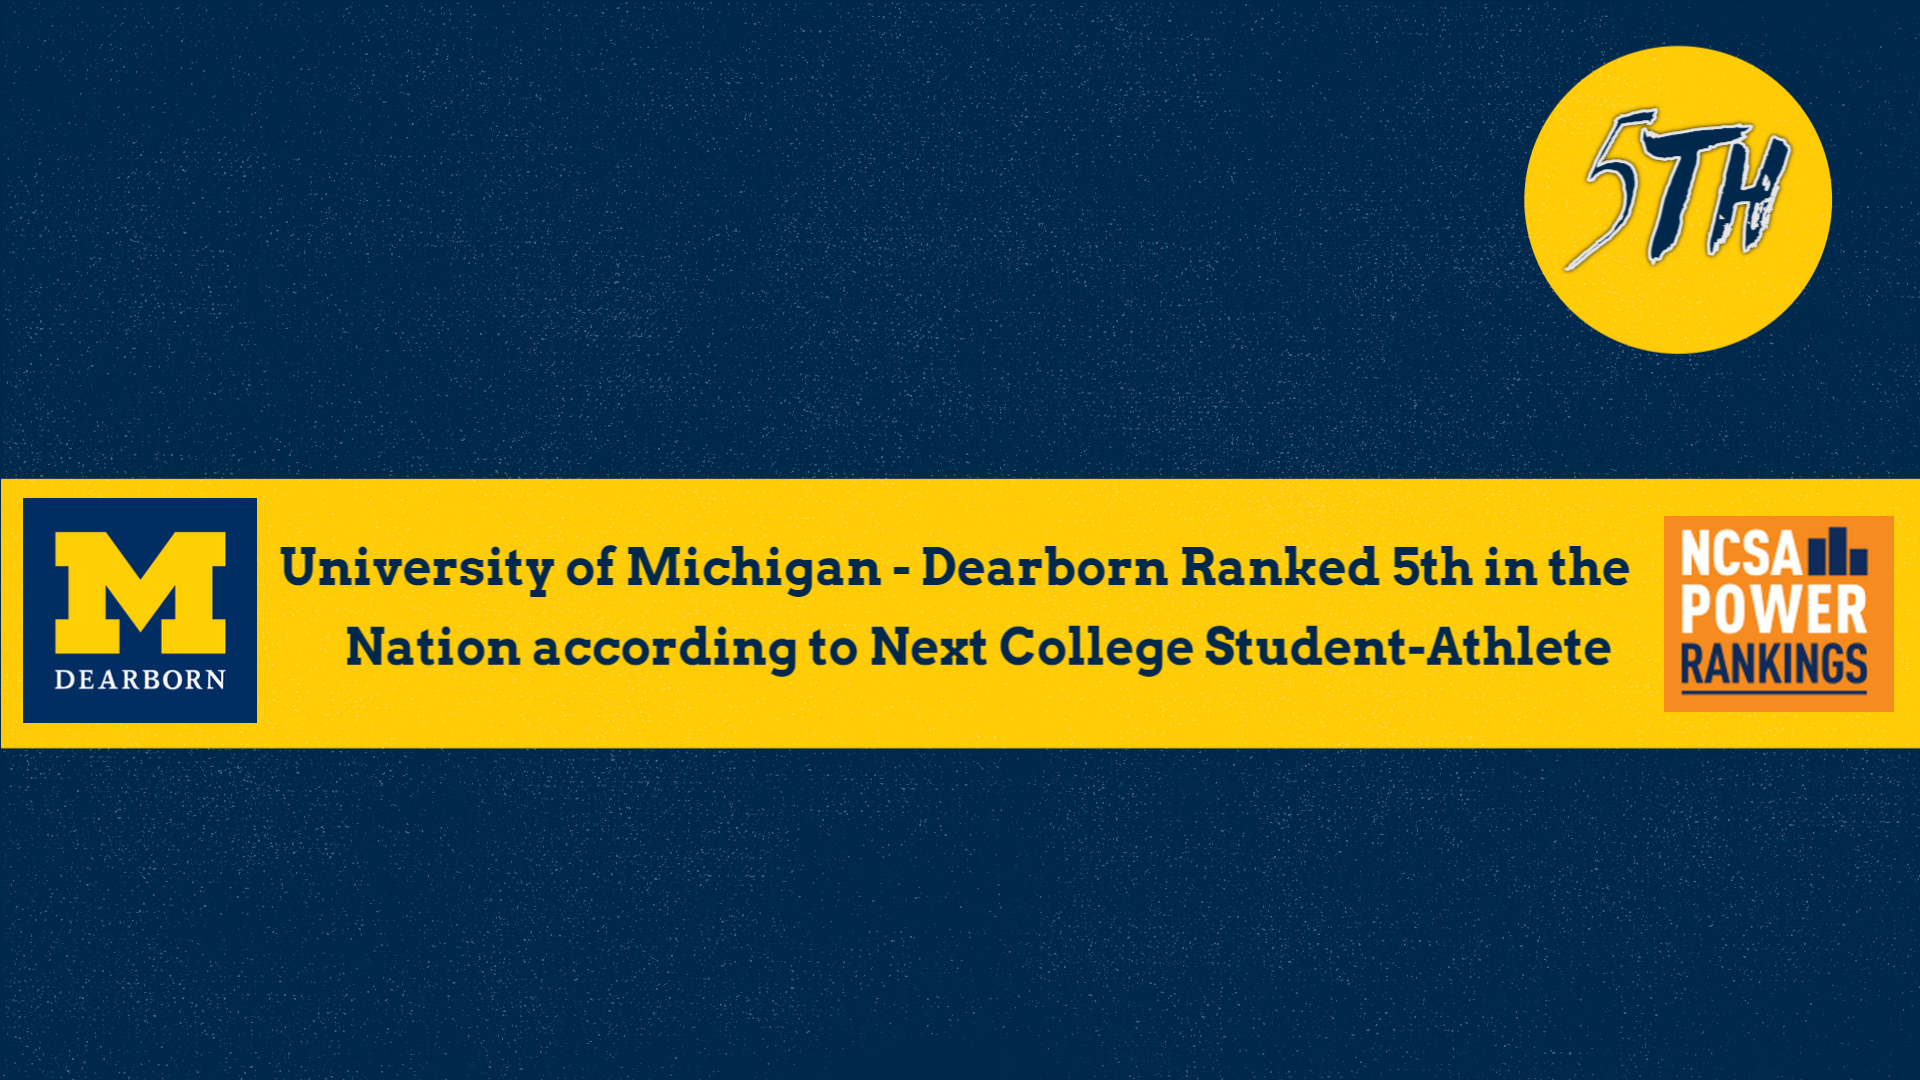 The University of Michigan-Dearborn was rated No. 5 in the nation According to NCSA